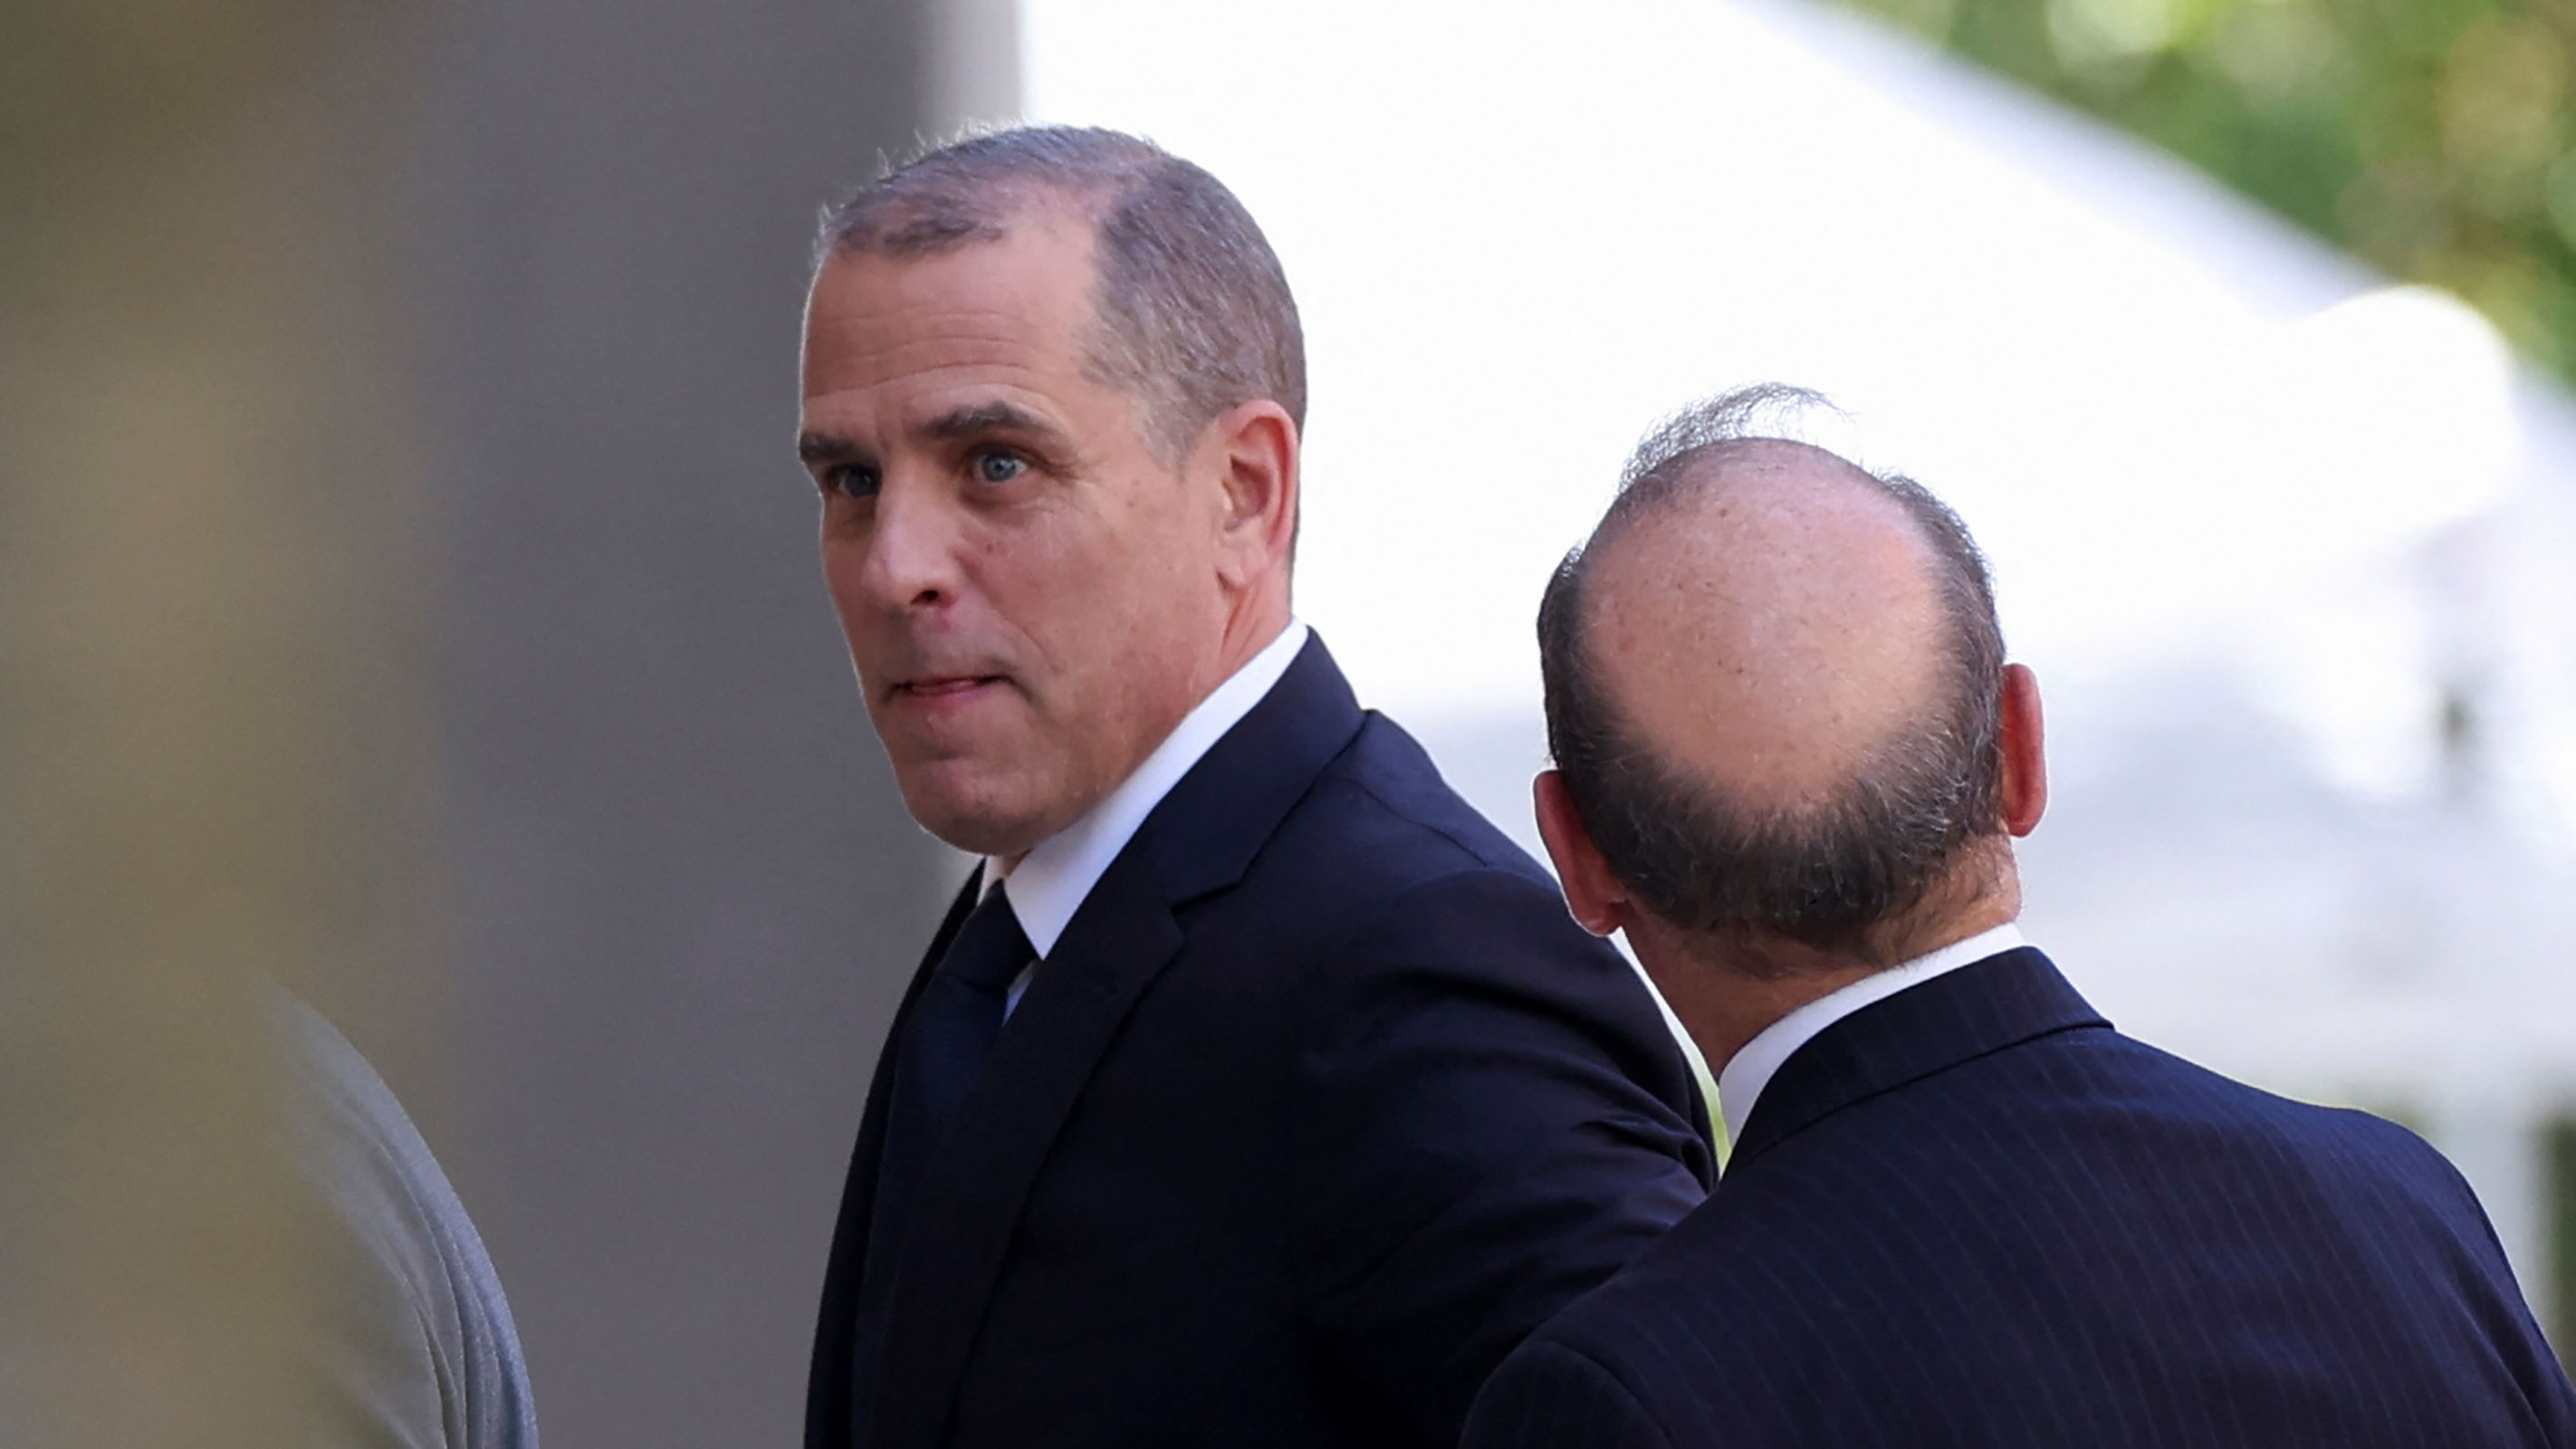 President Joe Biden's son, Hunter Biden, walks to appear in a federal court on gun charges in Wilmington, Delaware, on Tuesday.